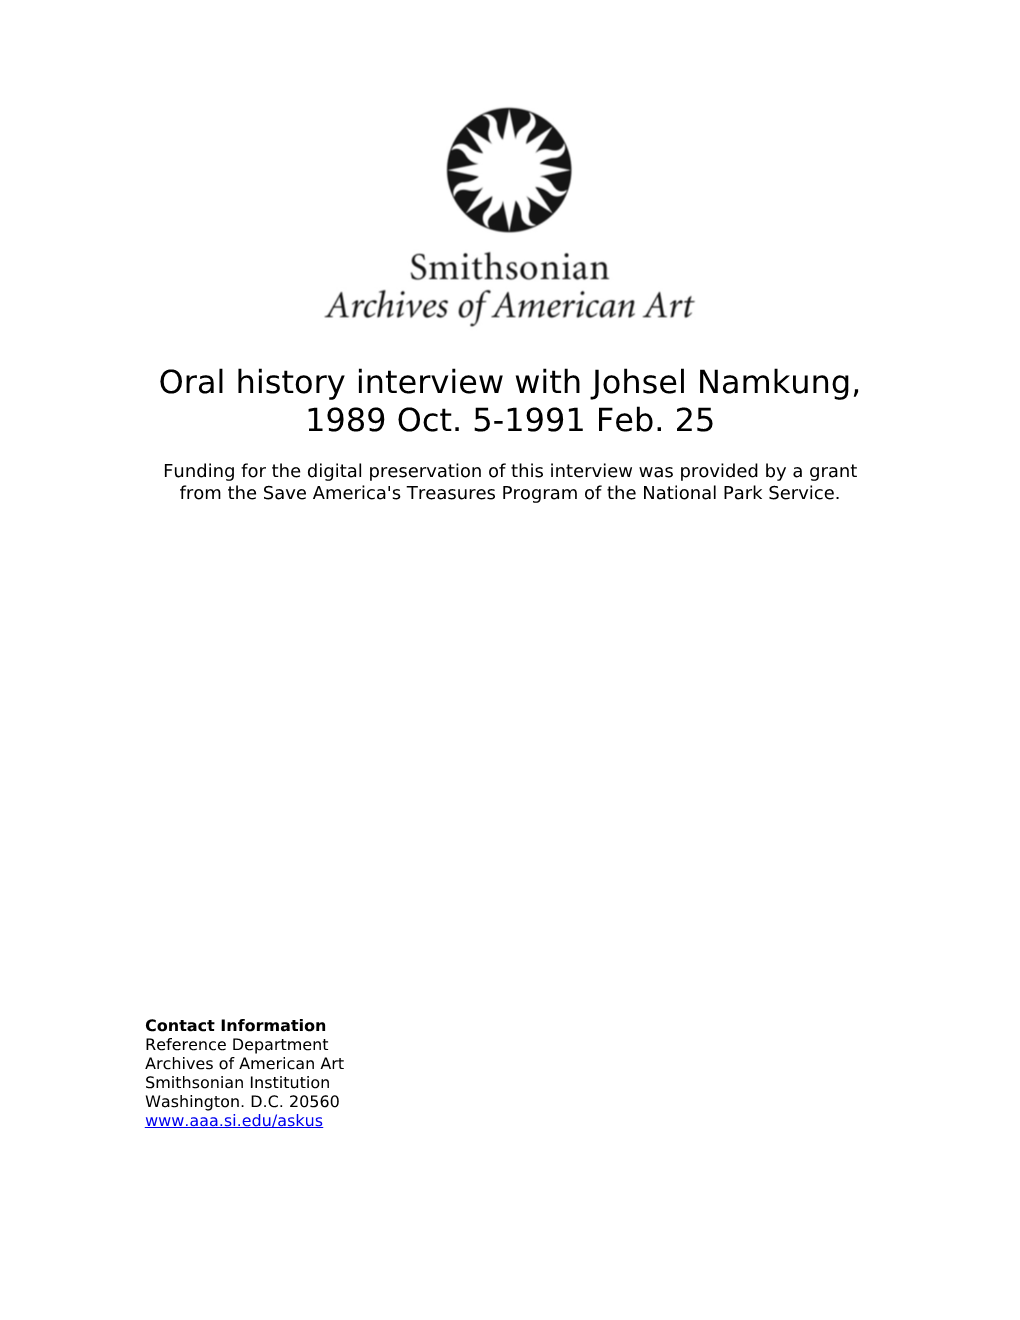 Oral History Interview with Johsel Namkung, 1989 Oct. 5-1991 Feb. 25